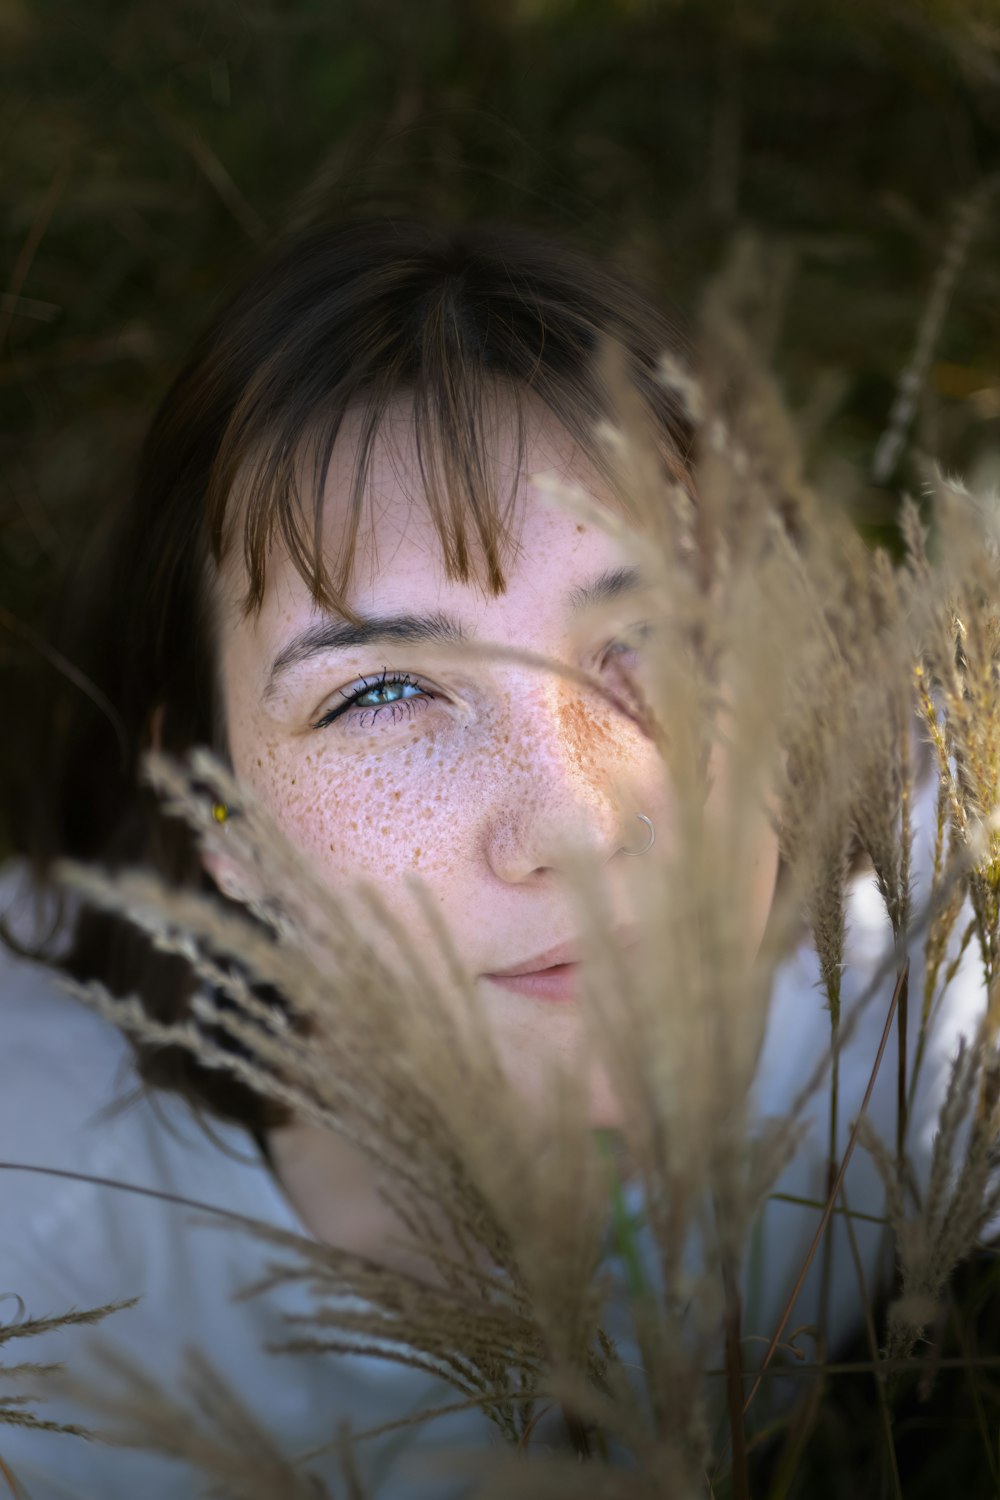 a woman with freckles on her face is hiding behind some tall grass